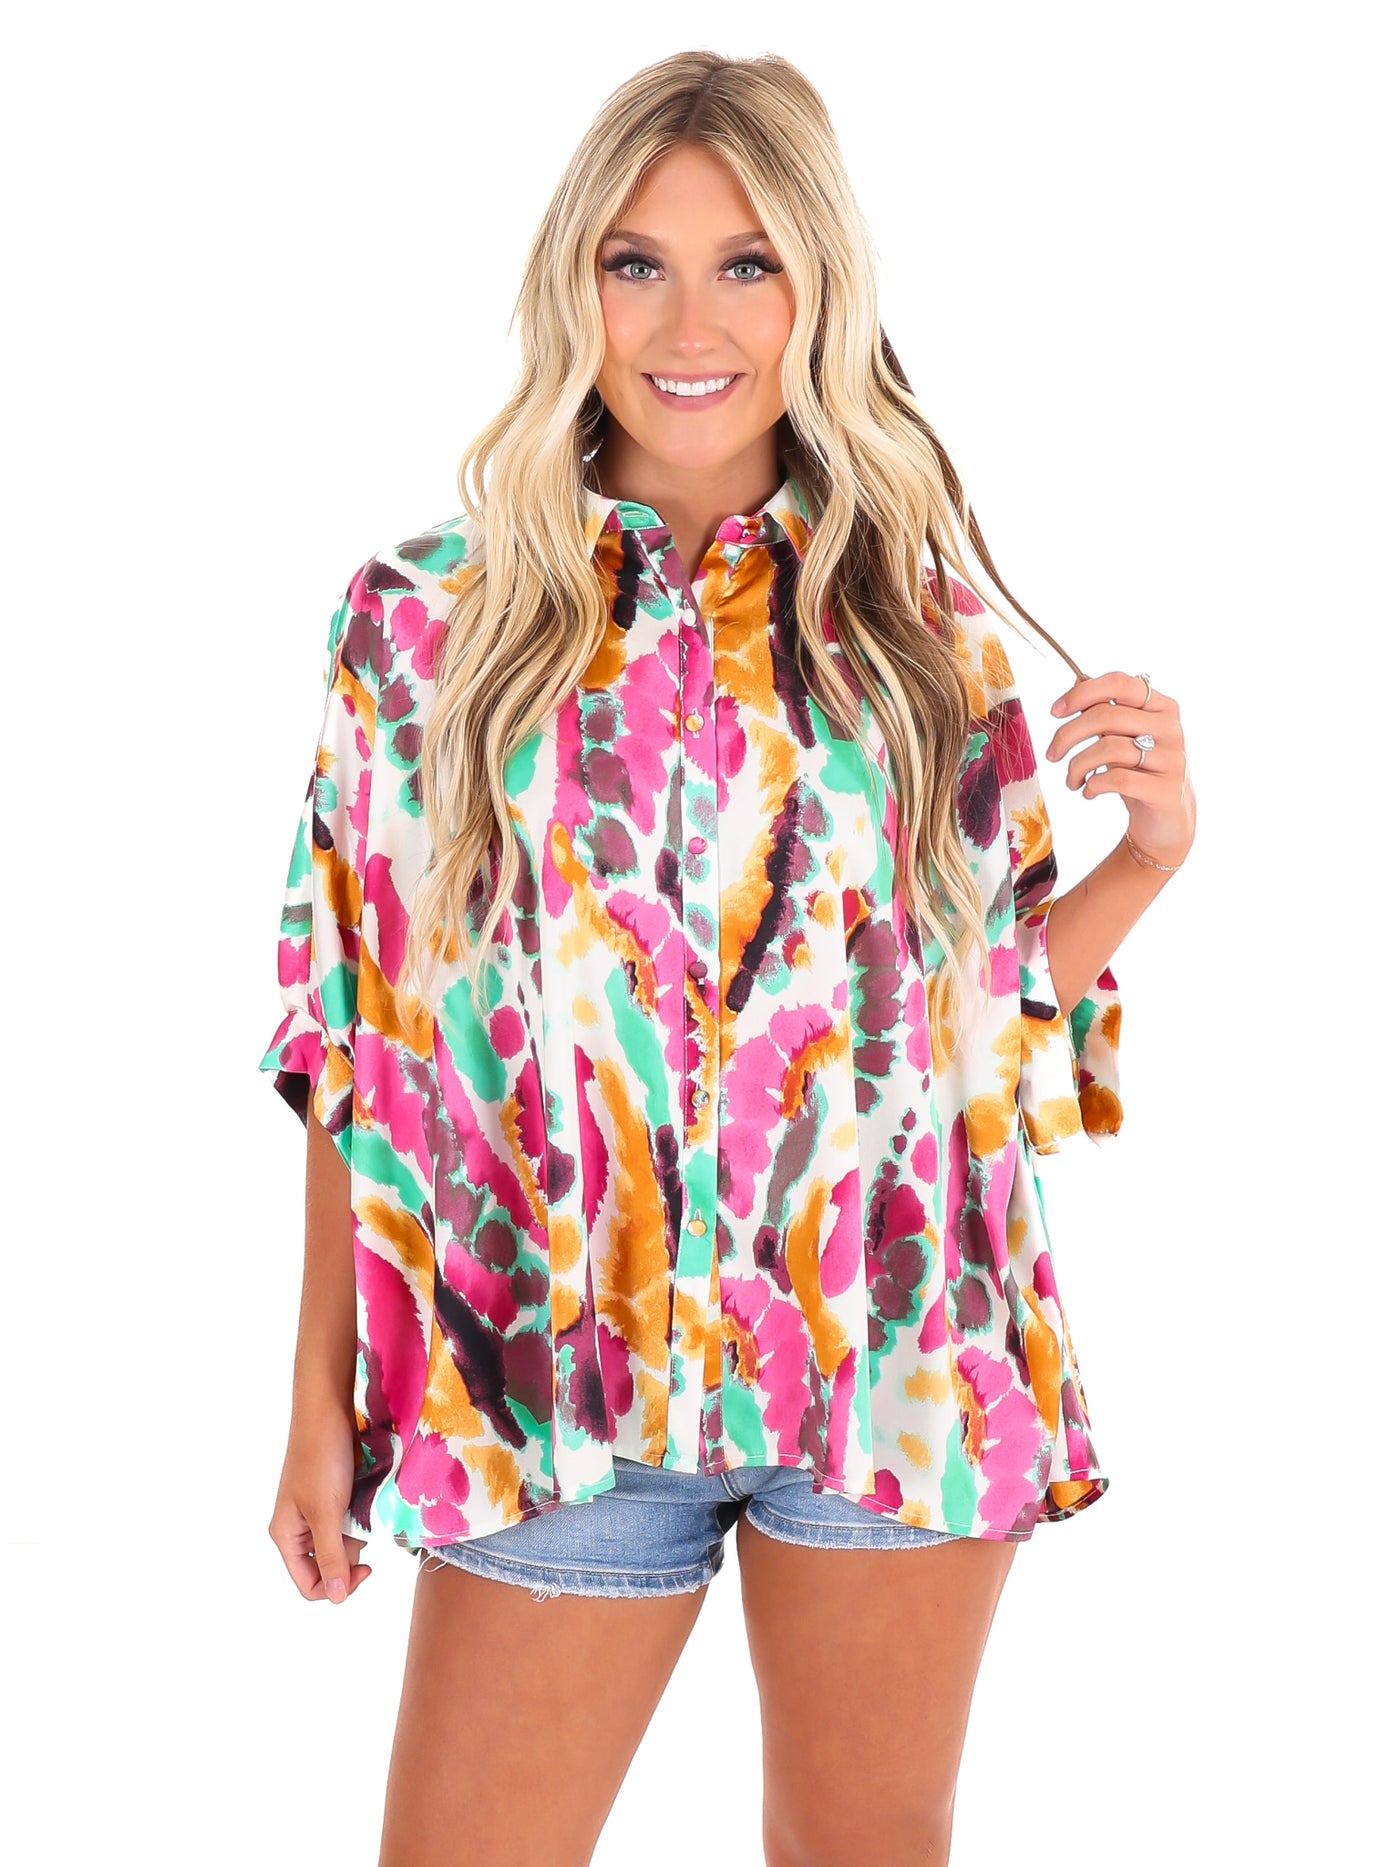 Anything is Possible Tie Dye Top